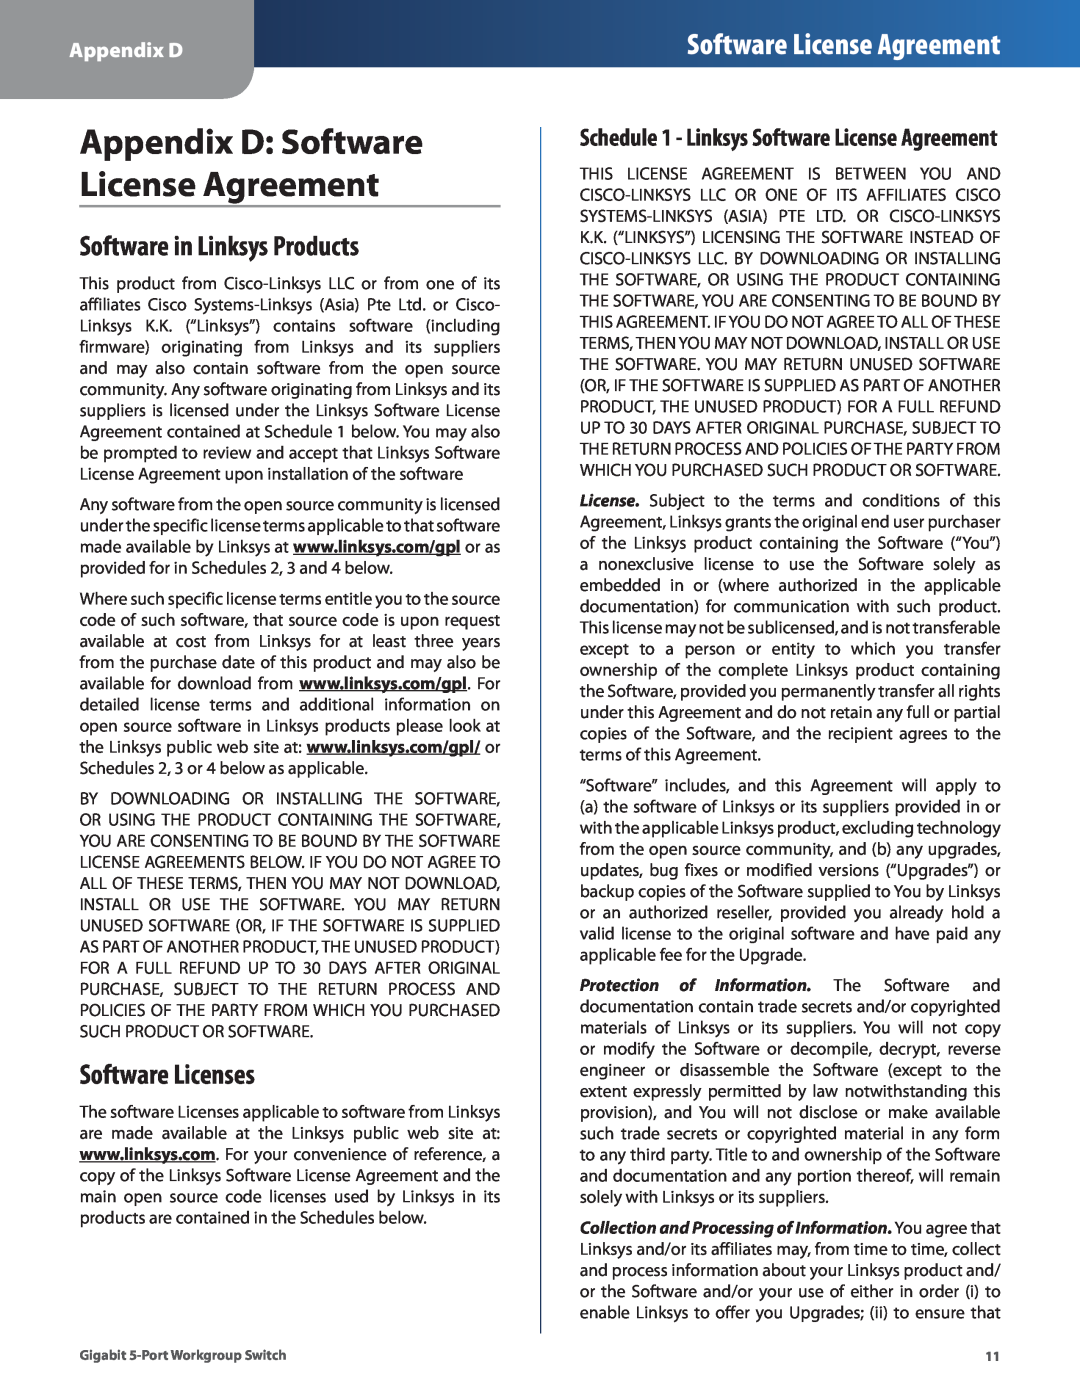 Cisco Systems EG005W manual Appendix D Software License Agreement, Software in Linksys Products, Software Licenses 